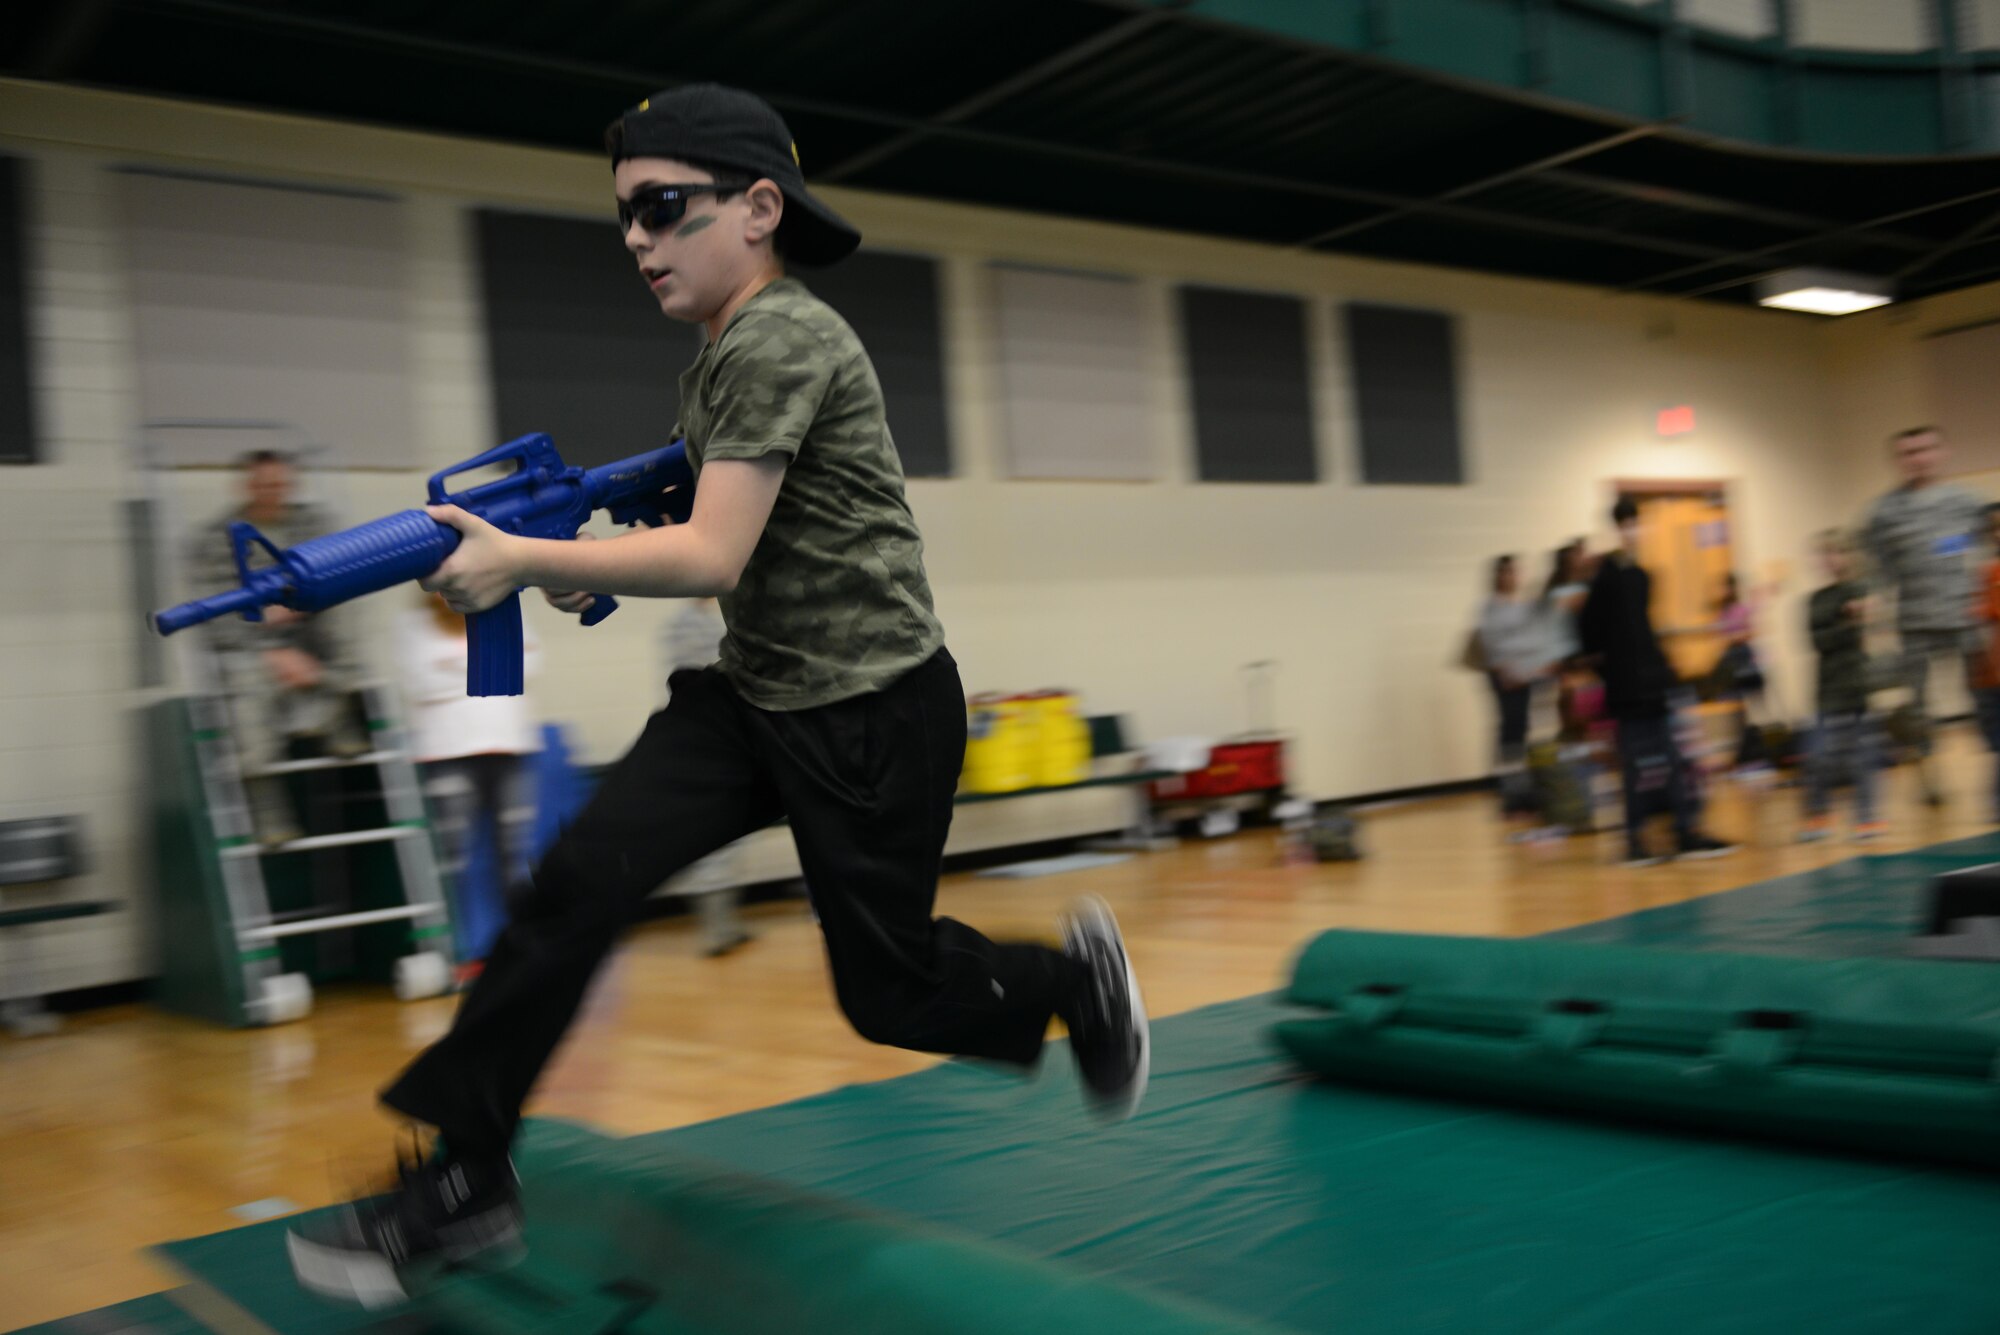 A junior deployer runs through the obstacle course section of “Operation XL,” on Laughlin Air Force Base, Texas, Nov. 5, 2016. “Operation XL” was a mock deployment held by the Airman and Family Readiness Center for base and local children to experience what a deployment could be like for military members. (U.S. Air Force photo/Airman 1st Class Benjamin N. Valmoja)